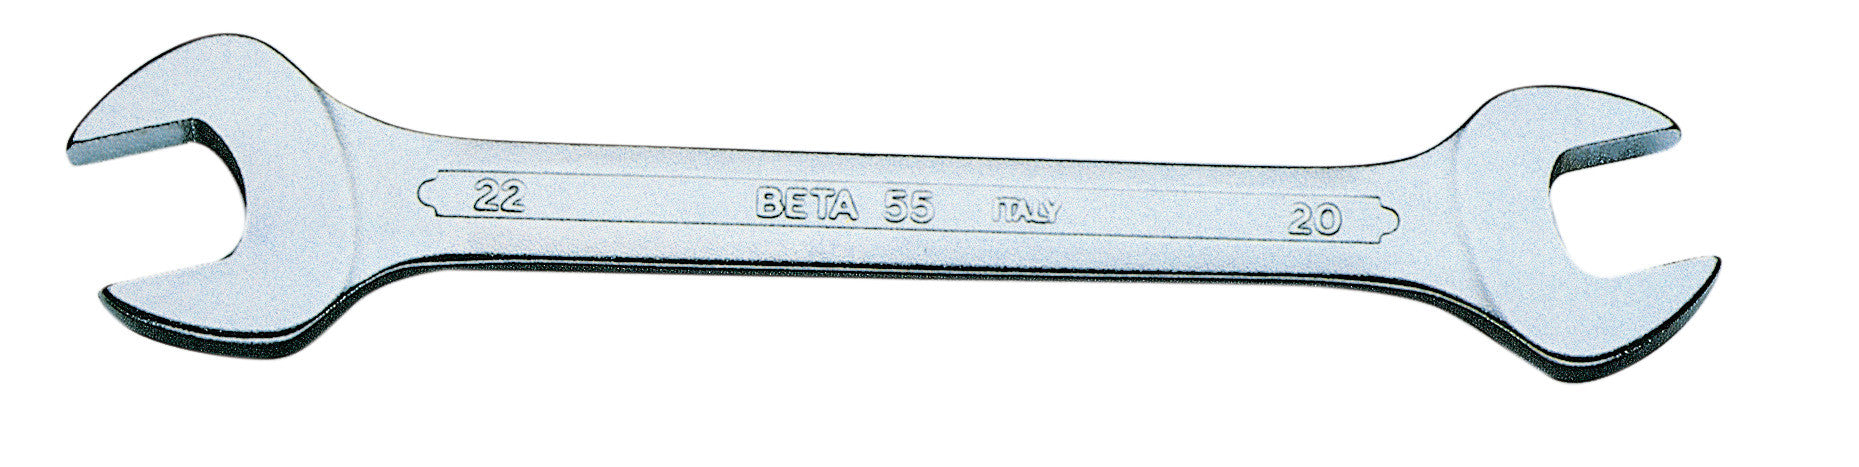 Beta art.  55 chiave a forc.doppia mm.21/23